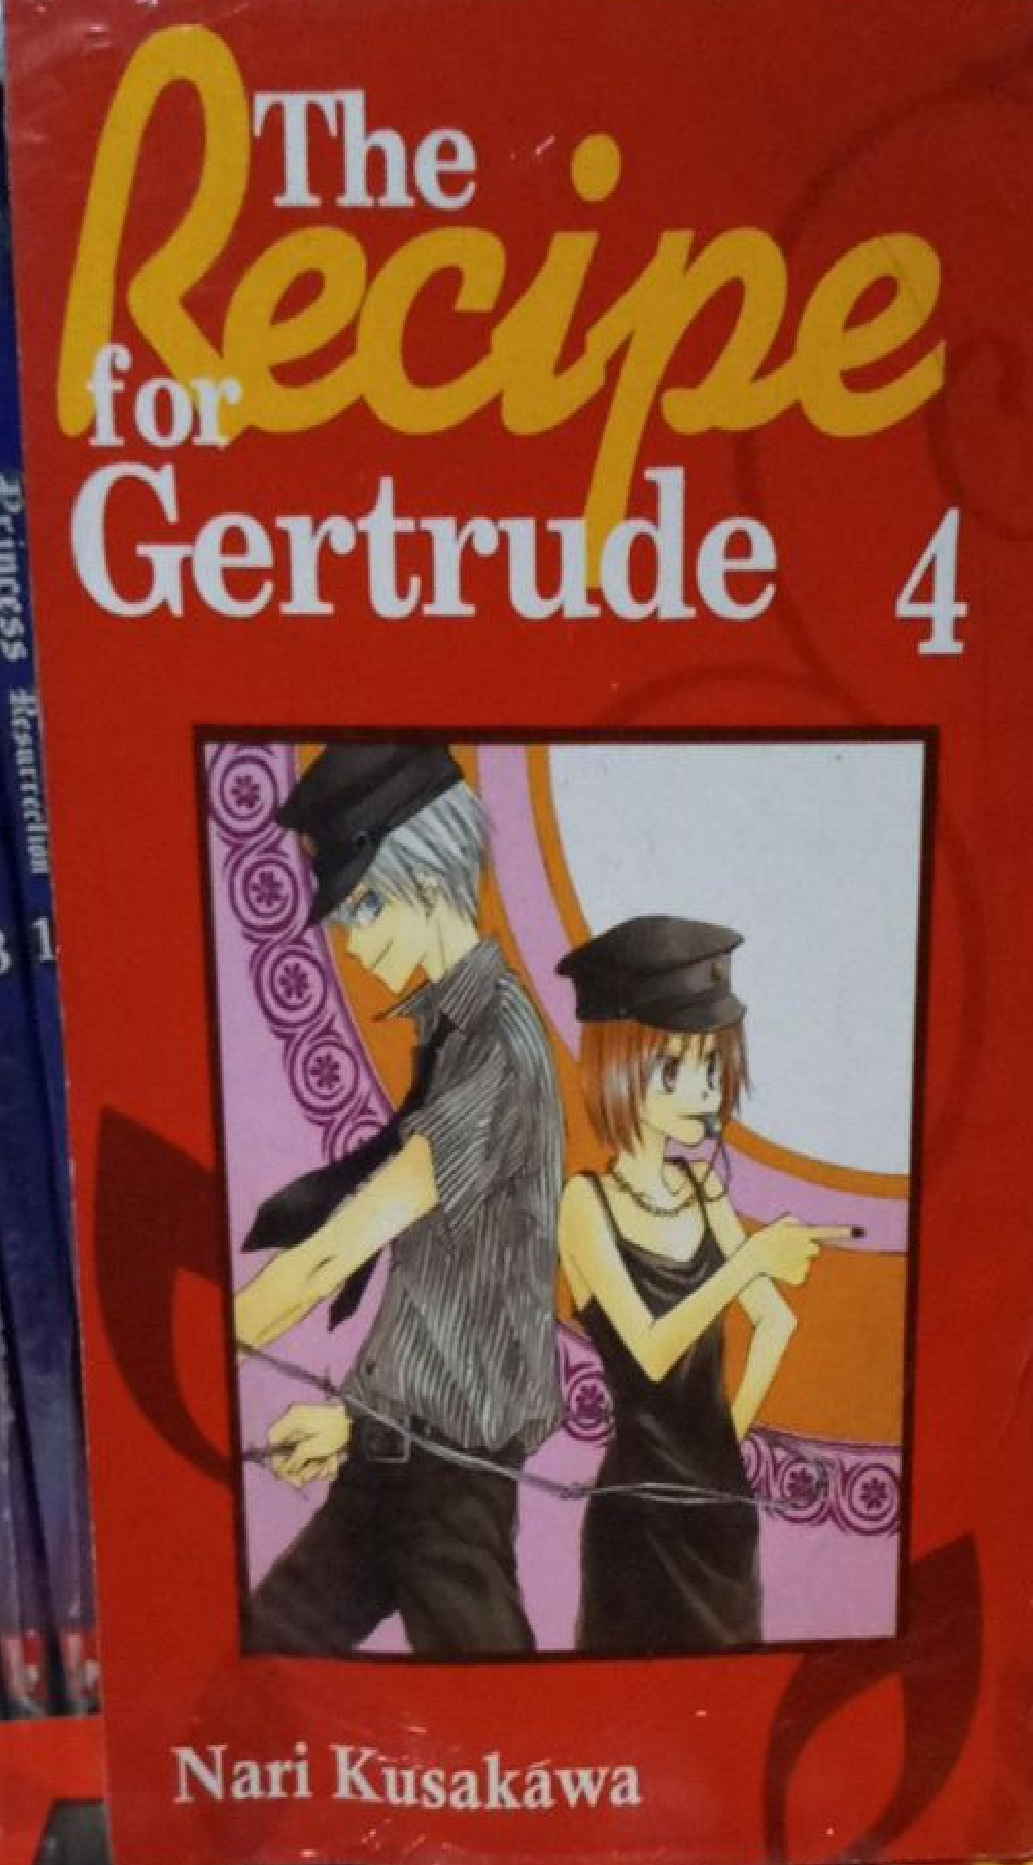 The recipe for gertrude vol 4